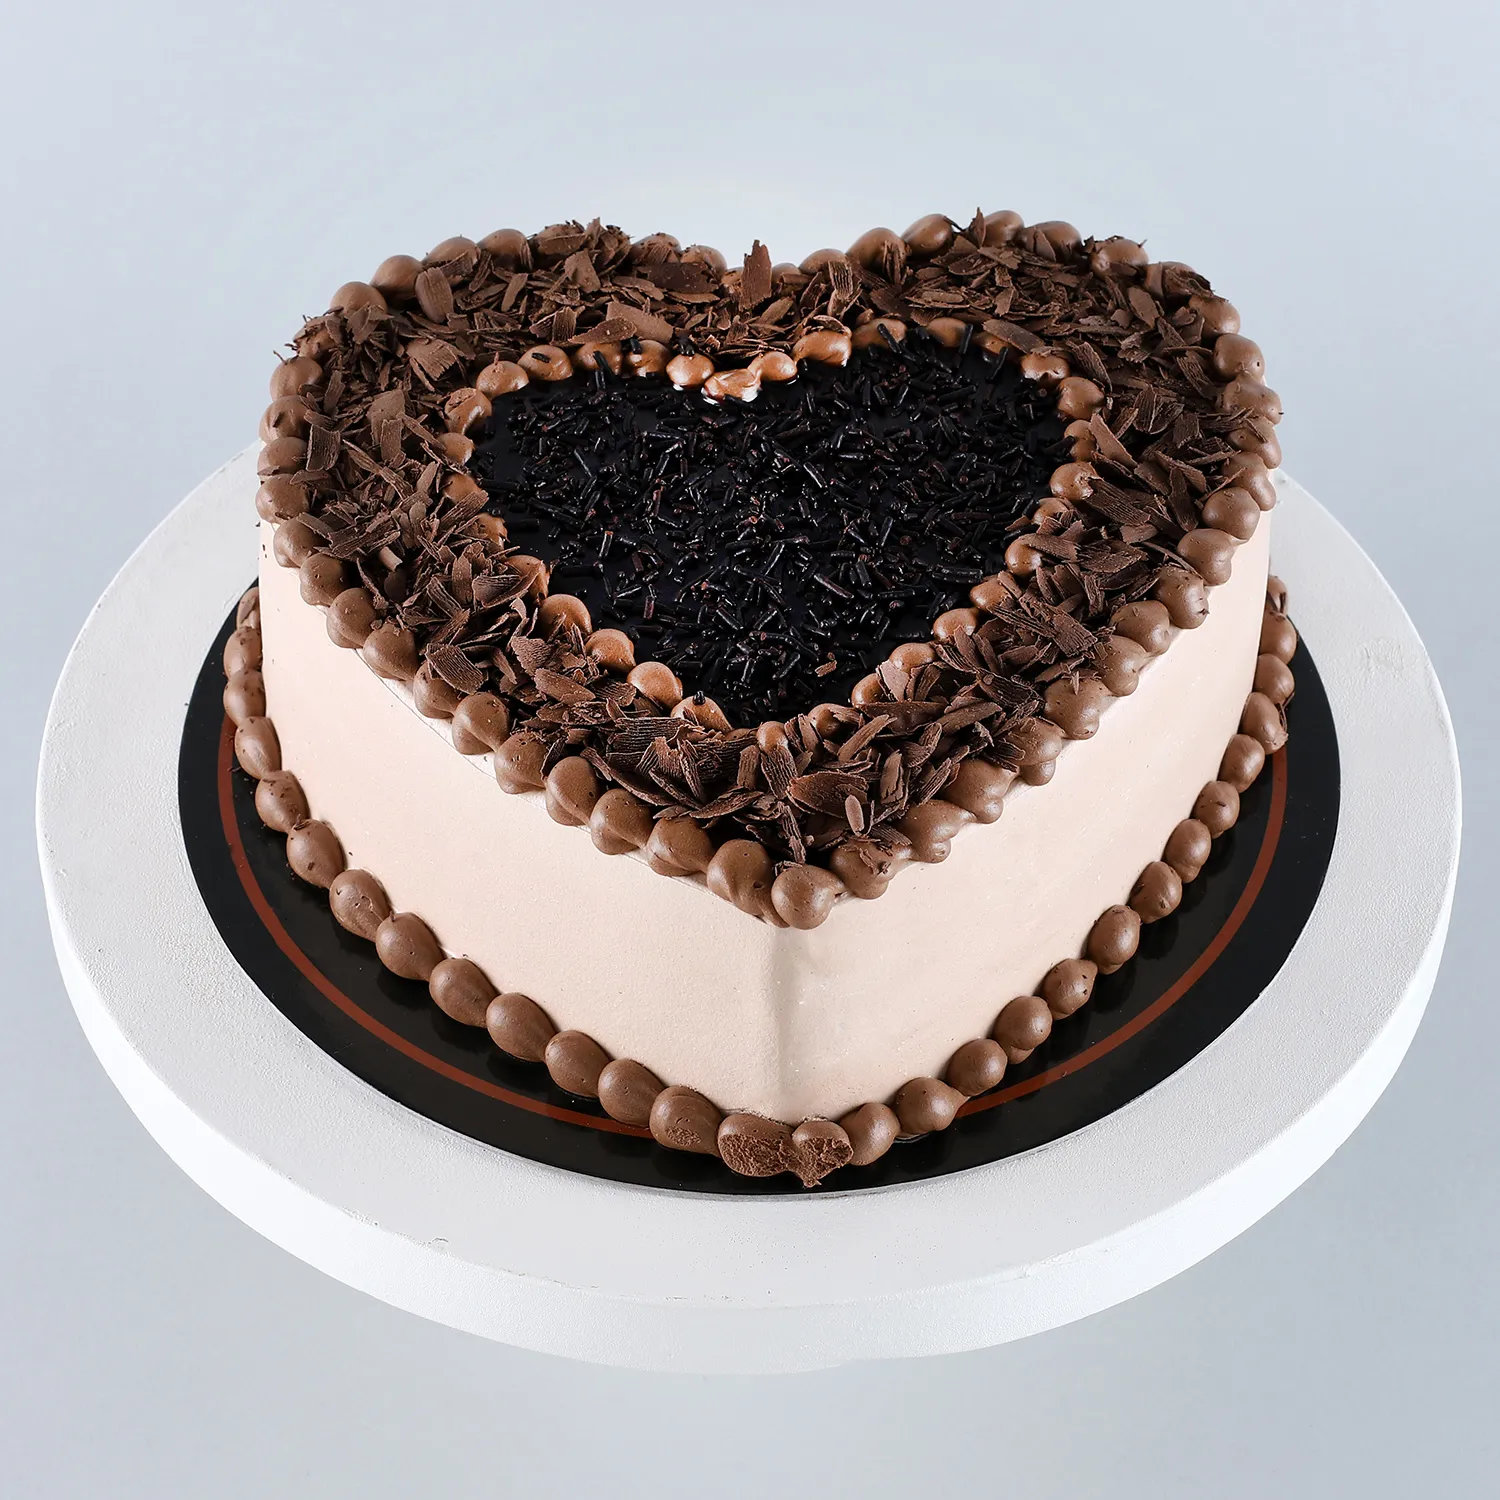 Delicious Heart Shaped Chocolate Cake - 500 Gram